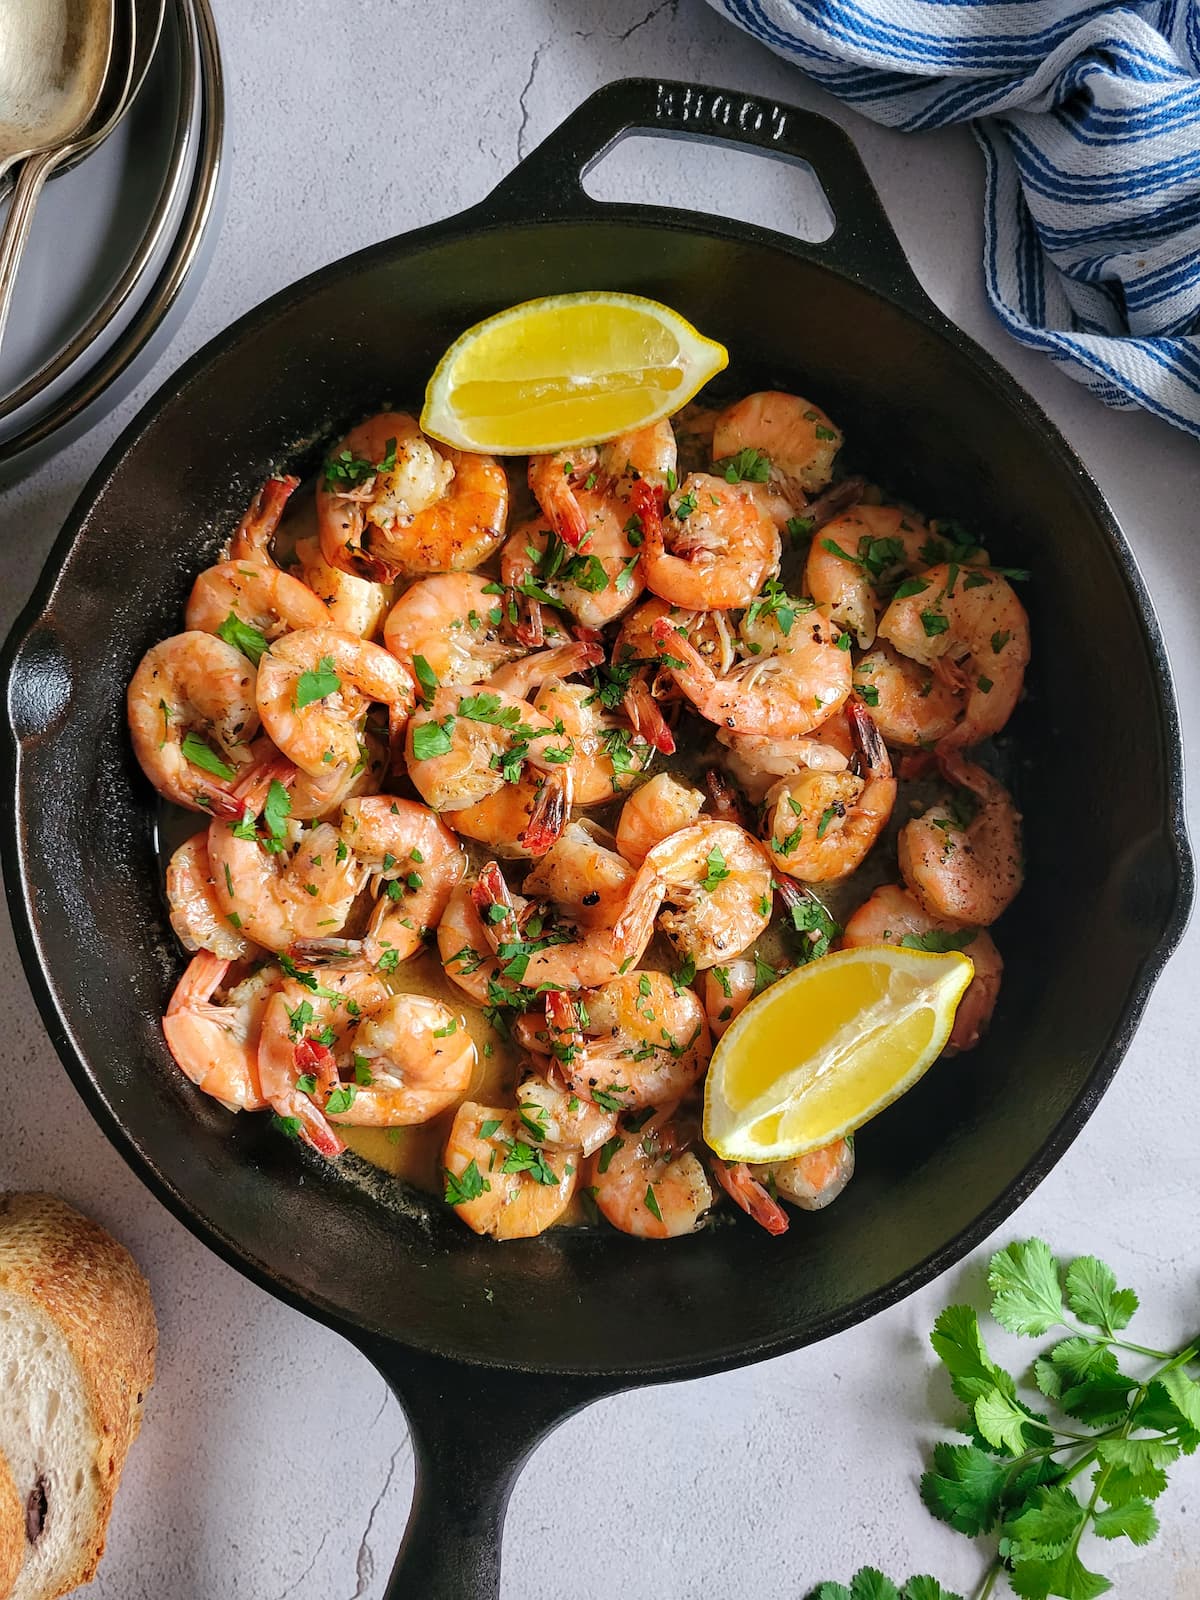 cast iron skillet with sauteed shrimp garnished with fresh chopped parsley and lemon wedges, bread and plates in the background